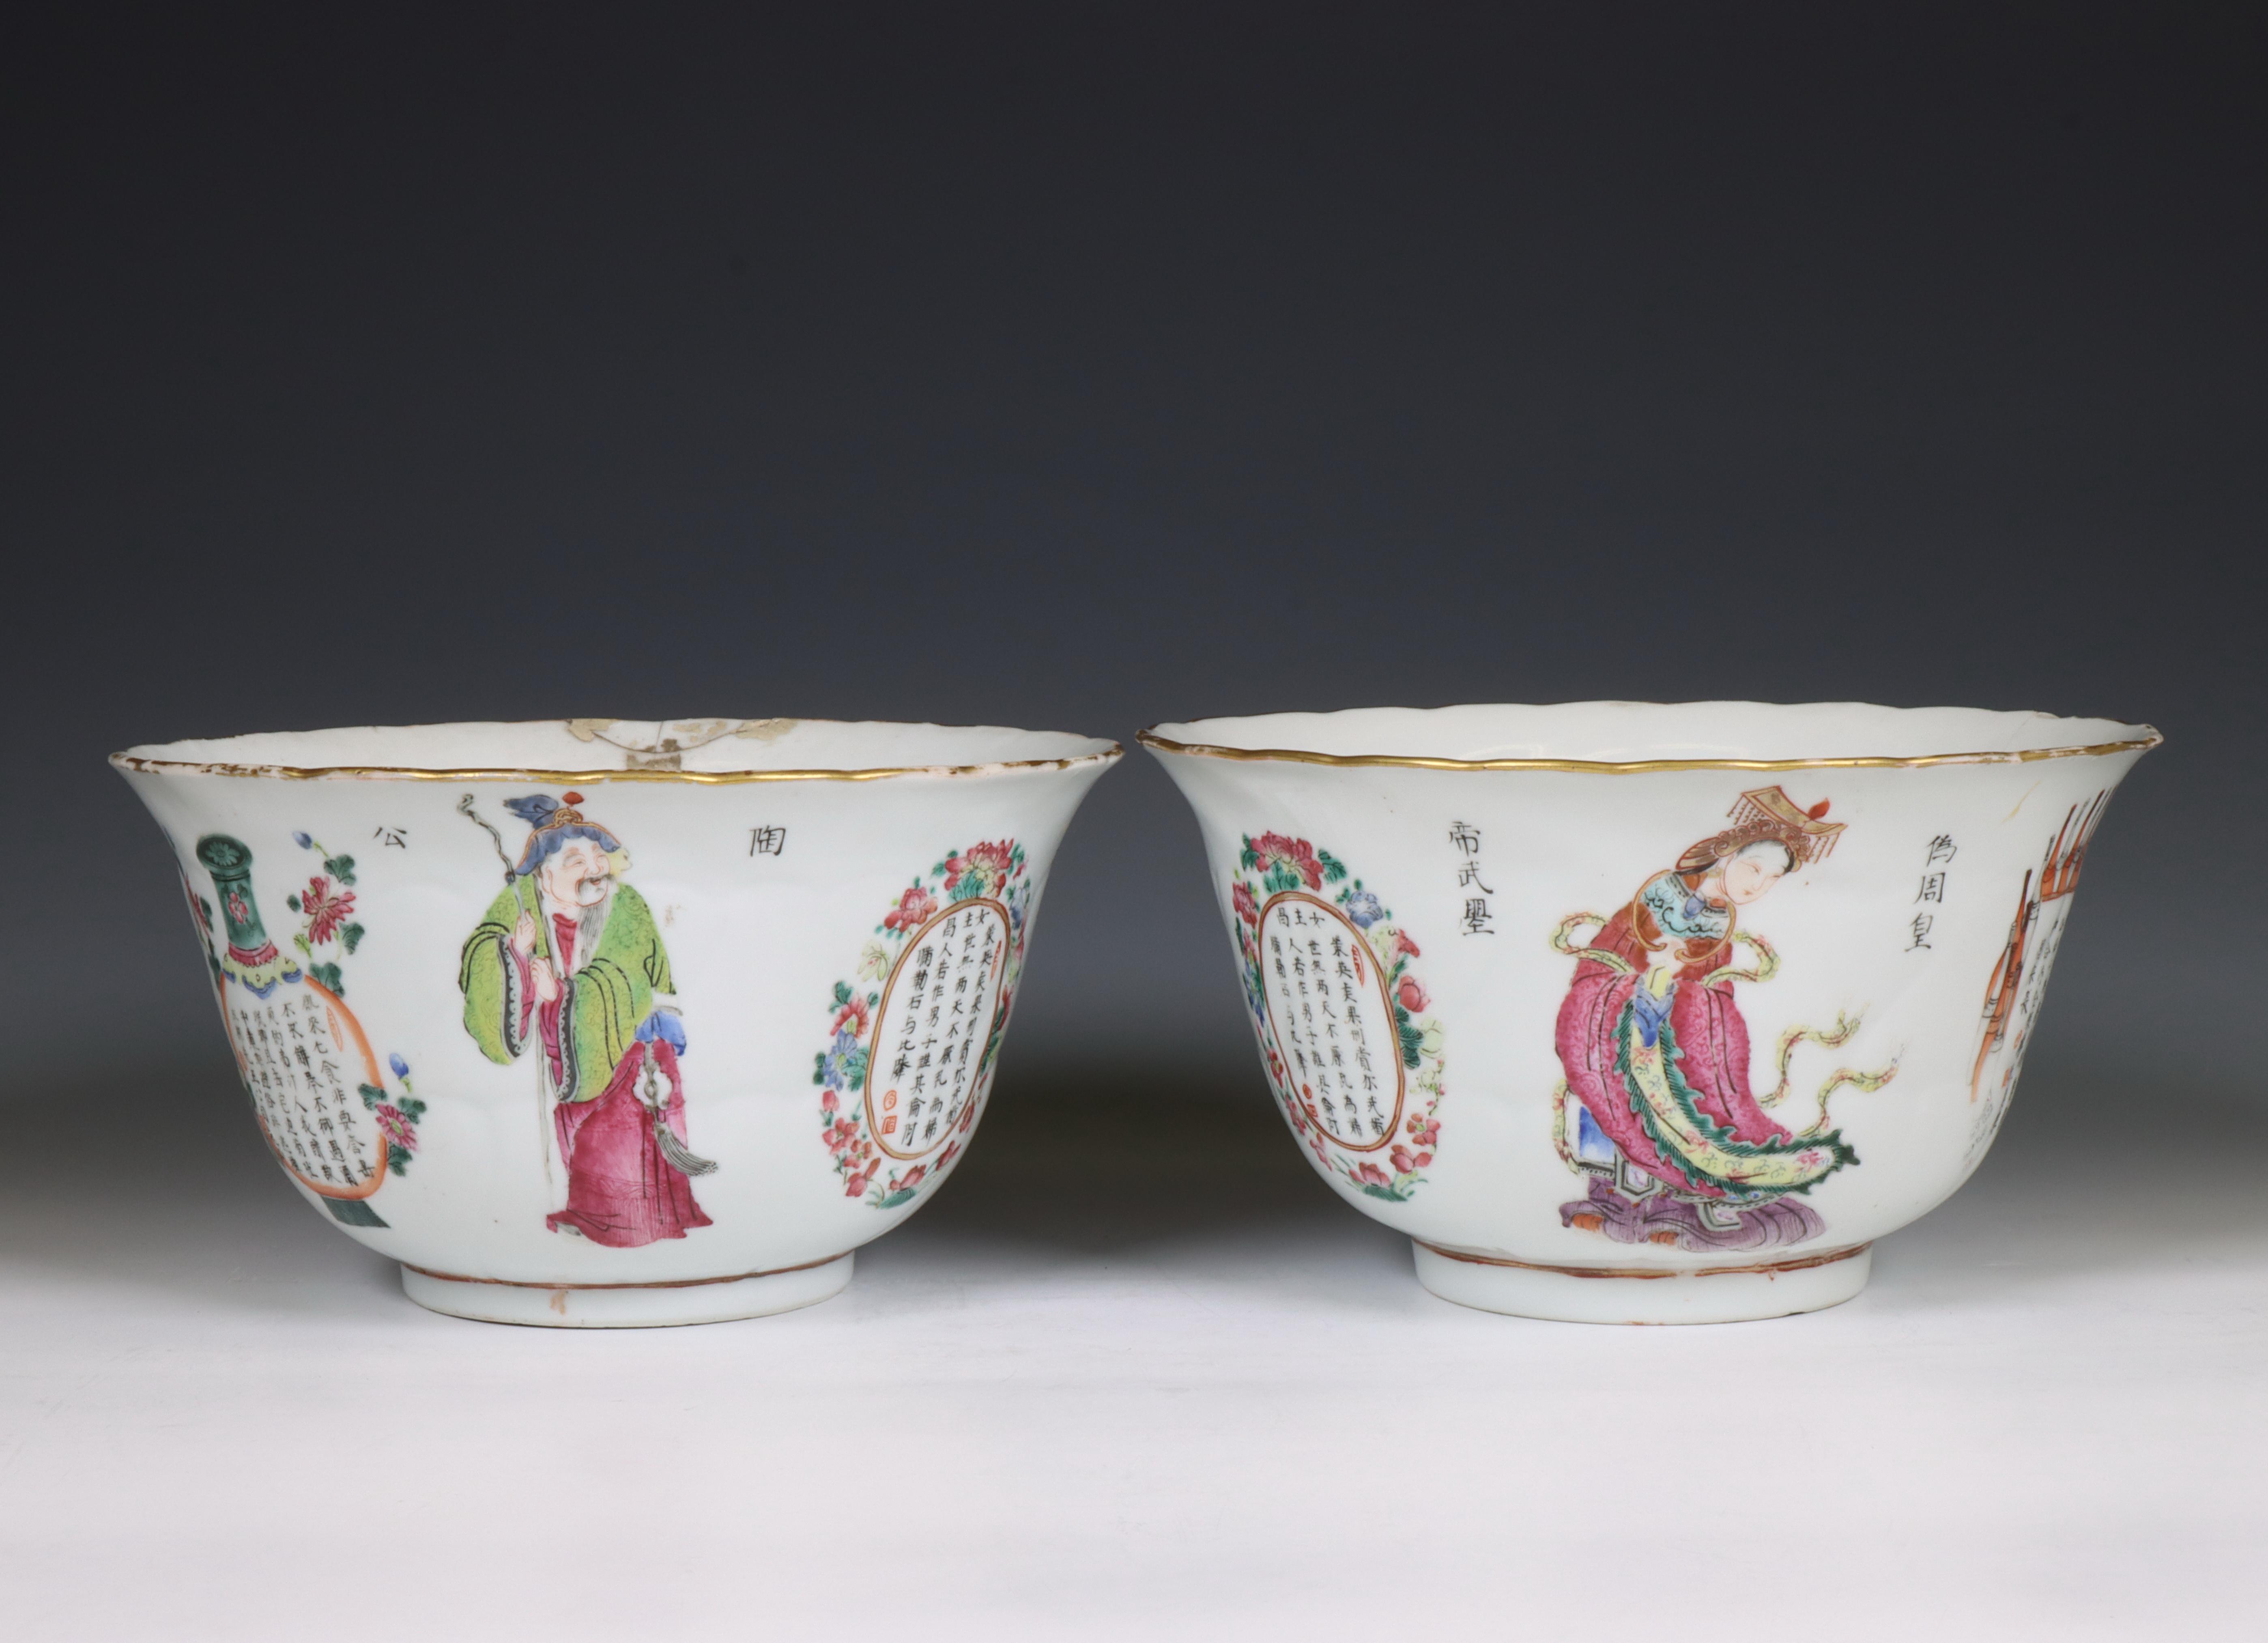 China, two famille rose porcelain 'Wu Shuang Pu' bowls, late Qing dynasty (1644-1912), - Image 6 of 9